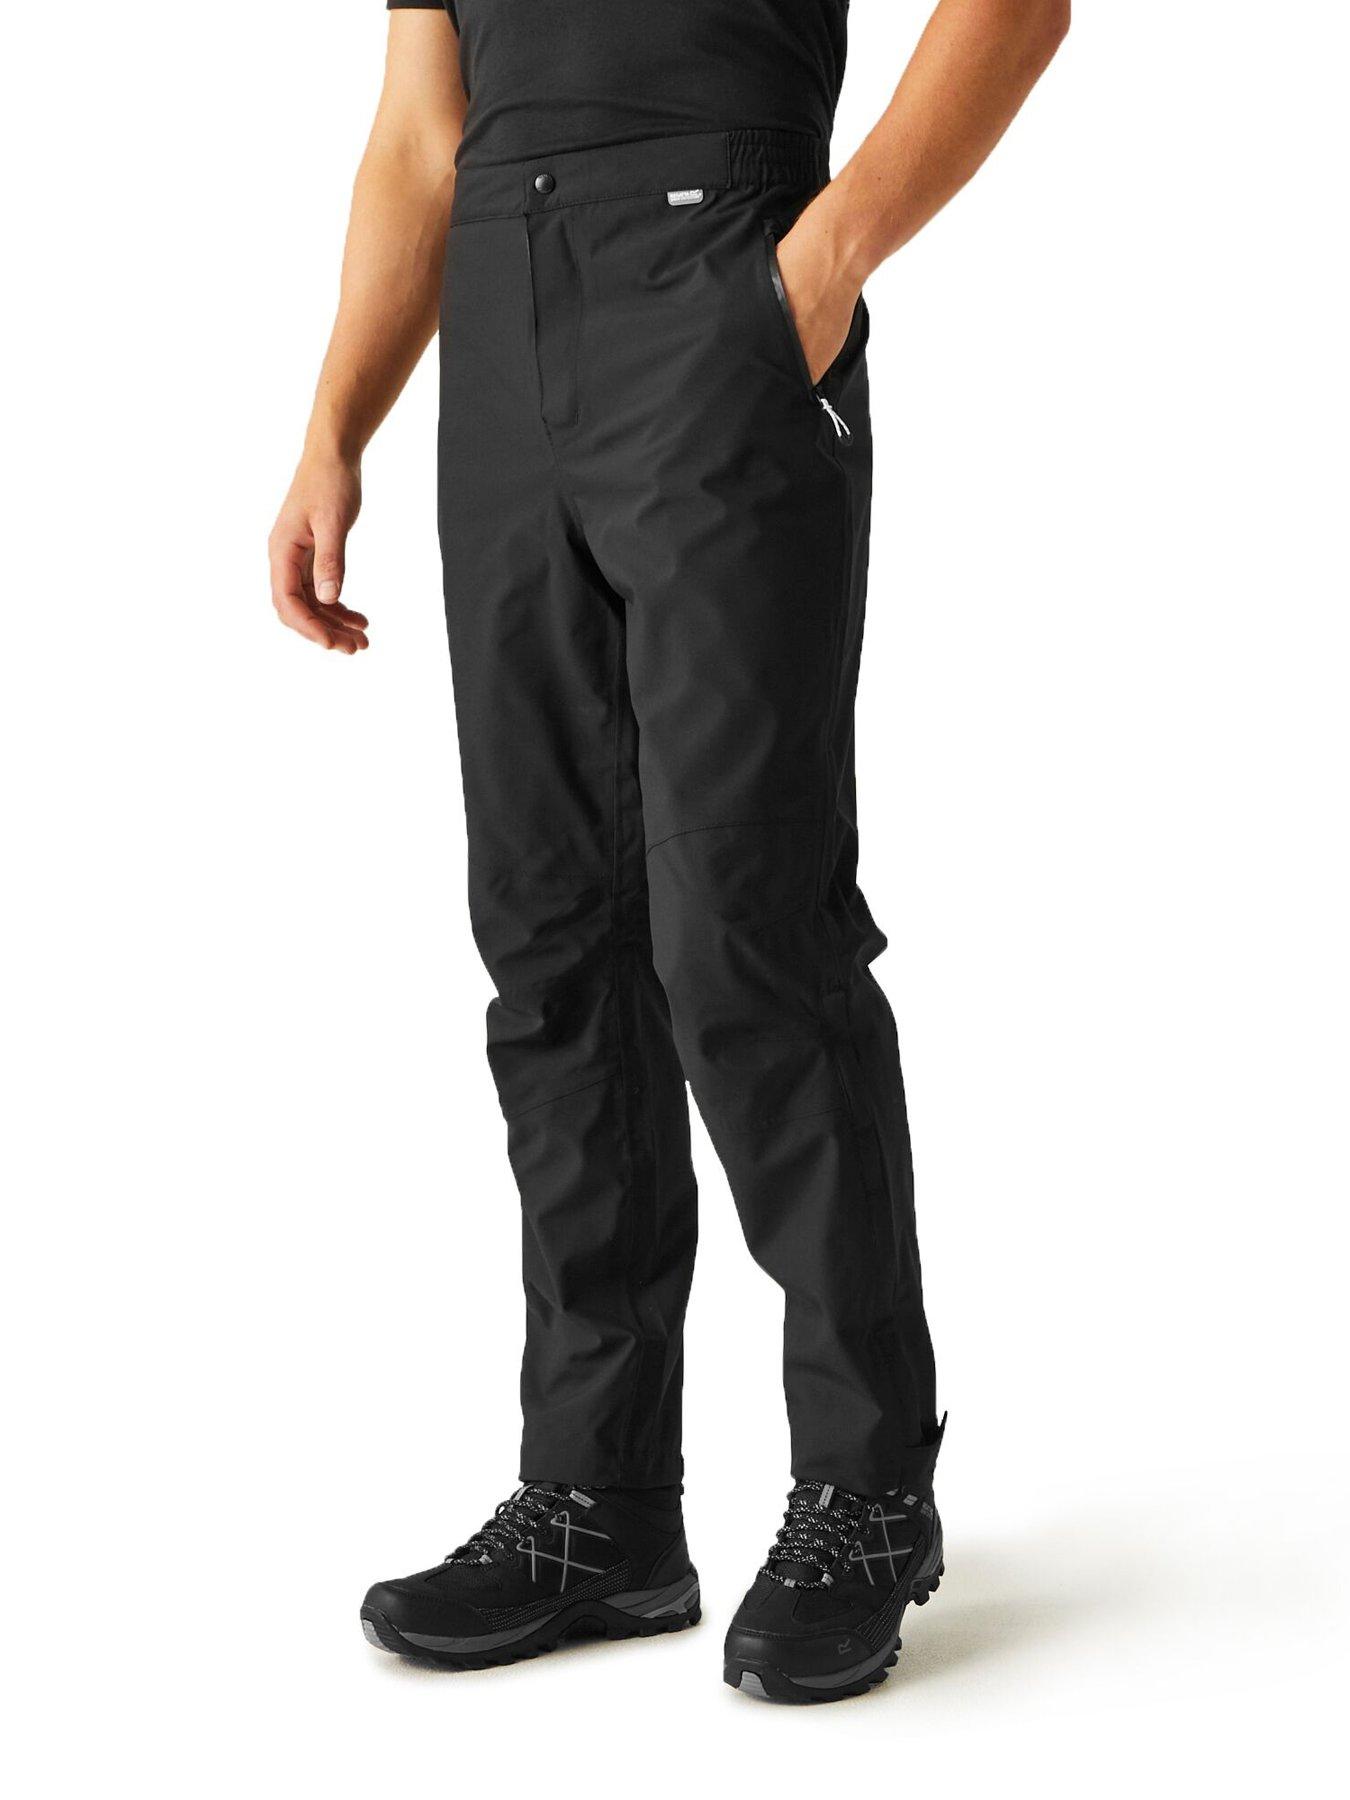 Buy Tog 24 Womens Black Silsden Waterproof Trousers from the Next